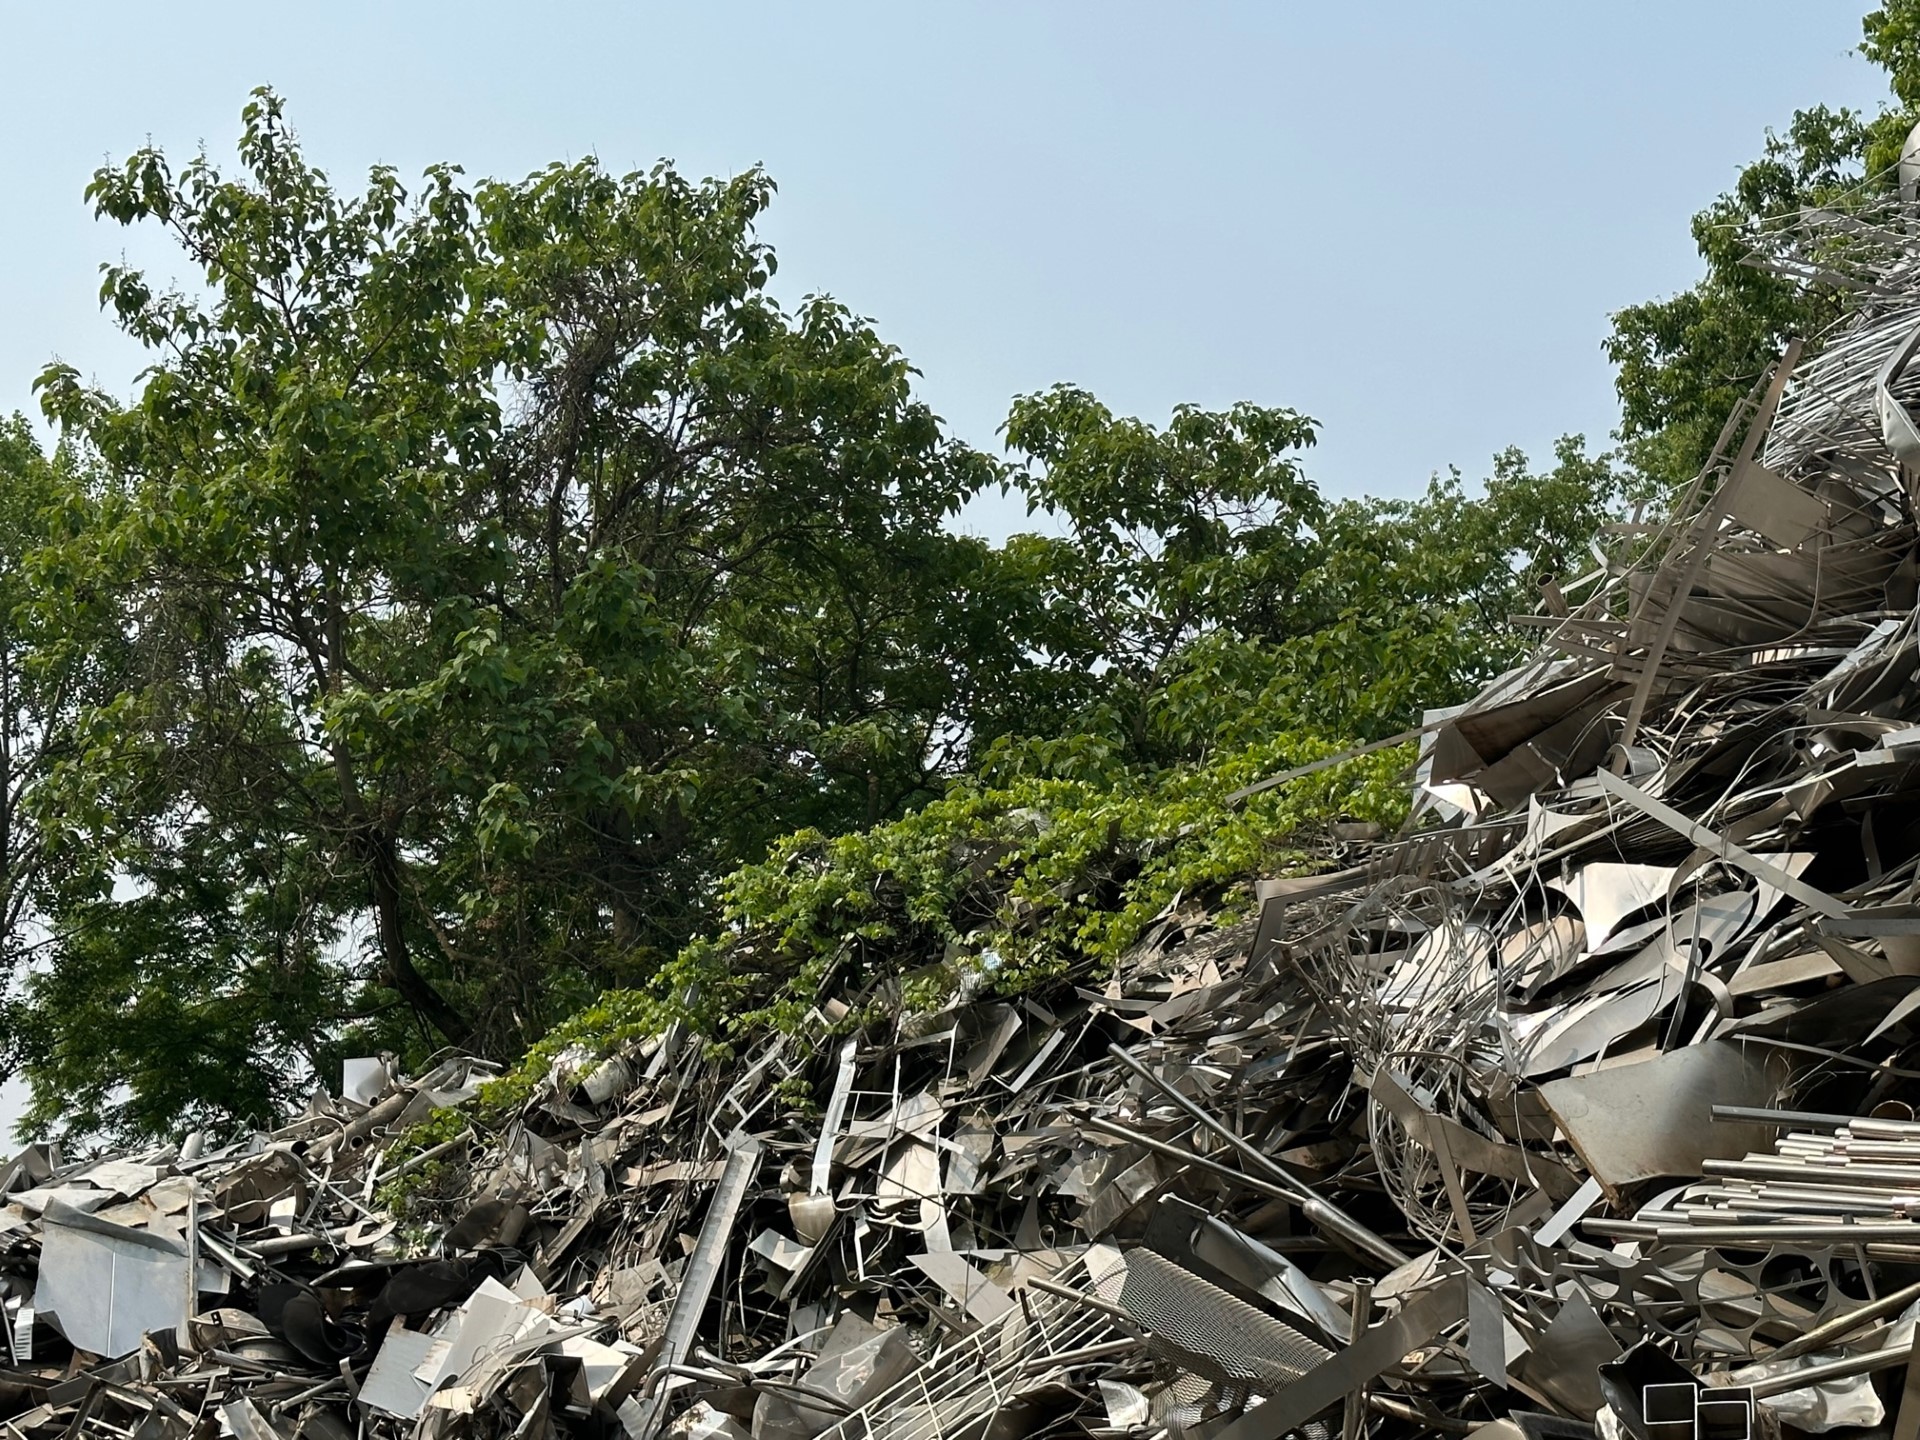 Photo of metal recycling pile